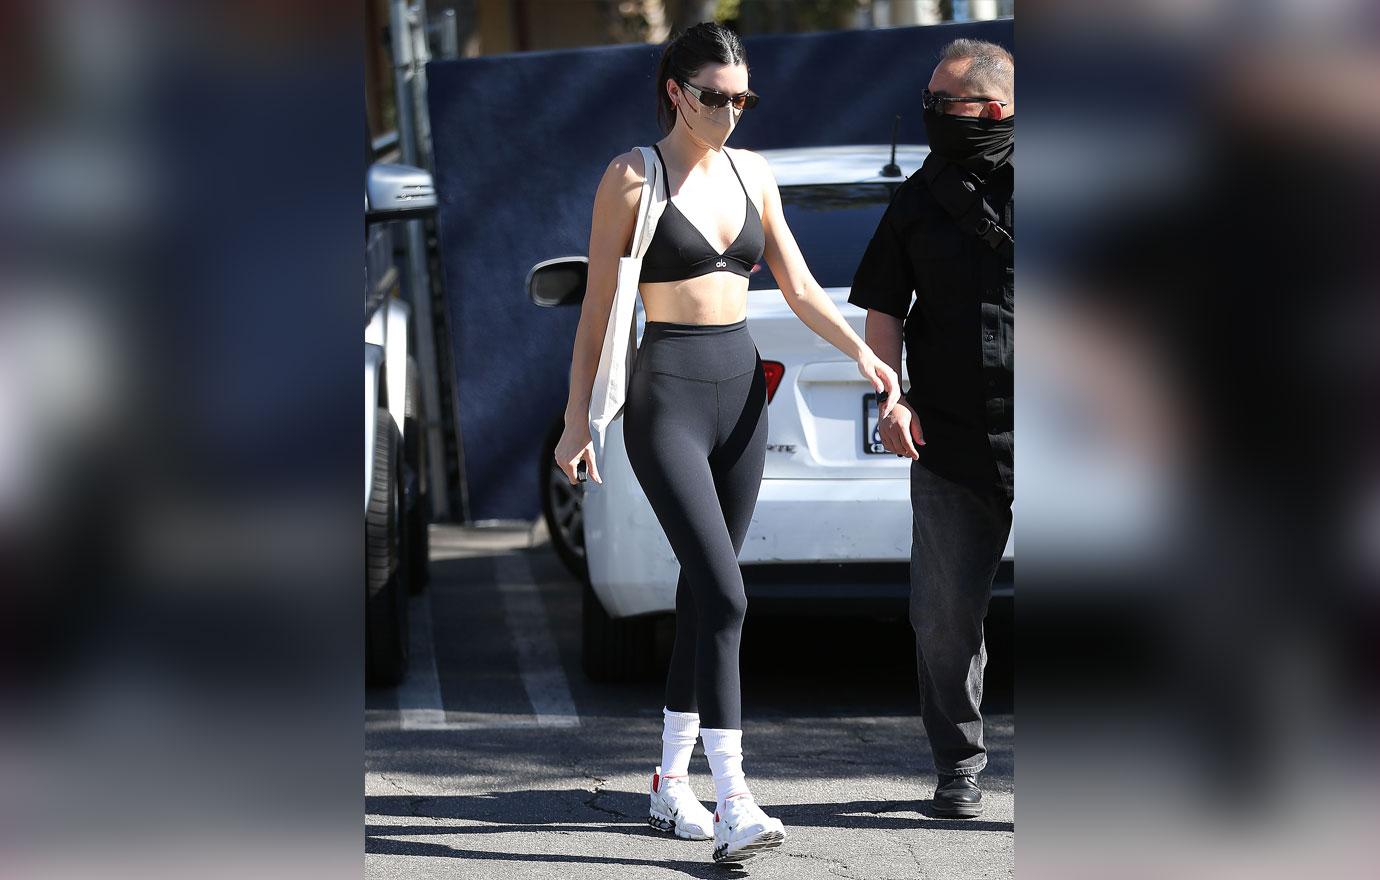 Get Inspired by Kendall Jenner's Stylish Gym Look